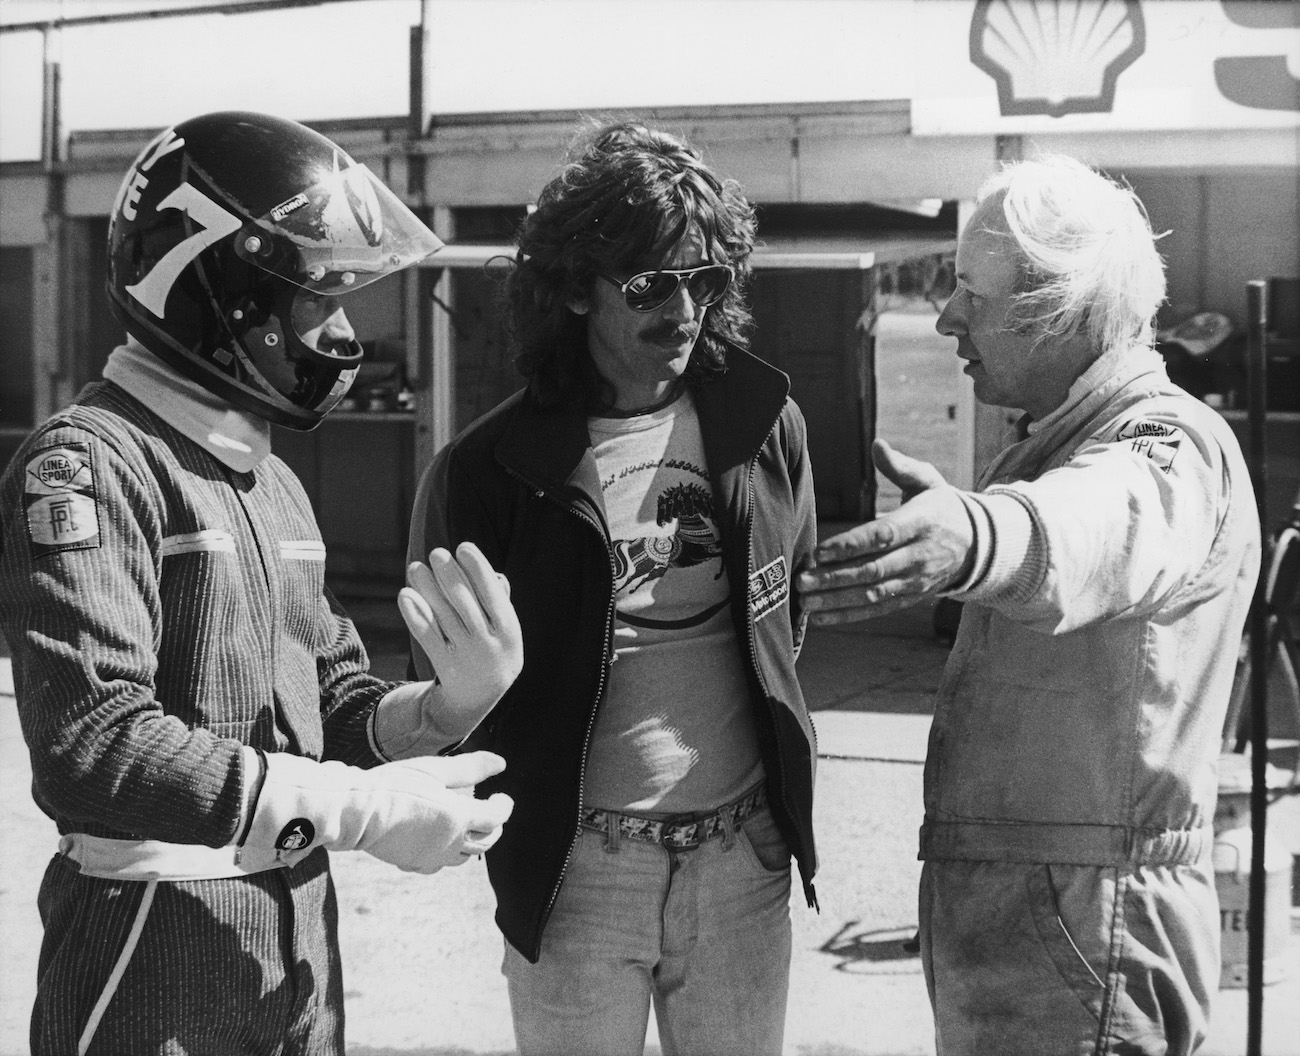 Ex-Beatle, George Harrison, with Barry Sheene and John Surtees at a Formula One race in 1978. 